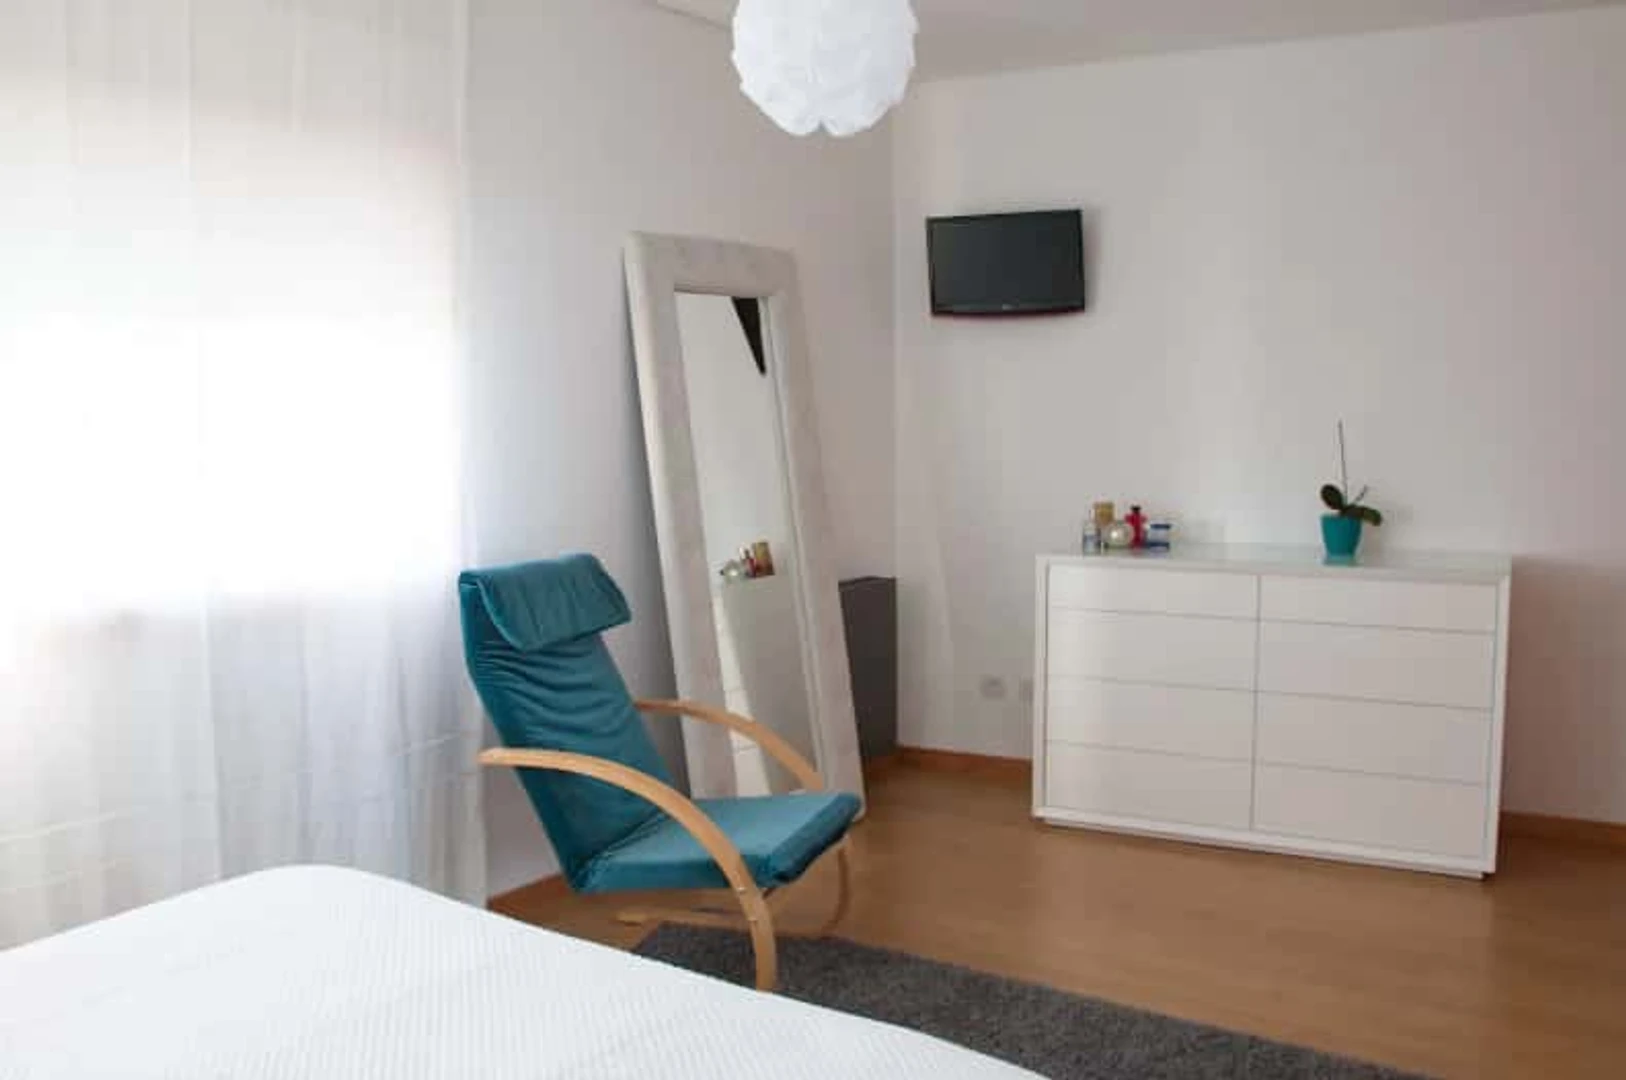 Accommodation with 3 bedrooms in Aveiro